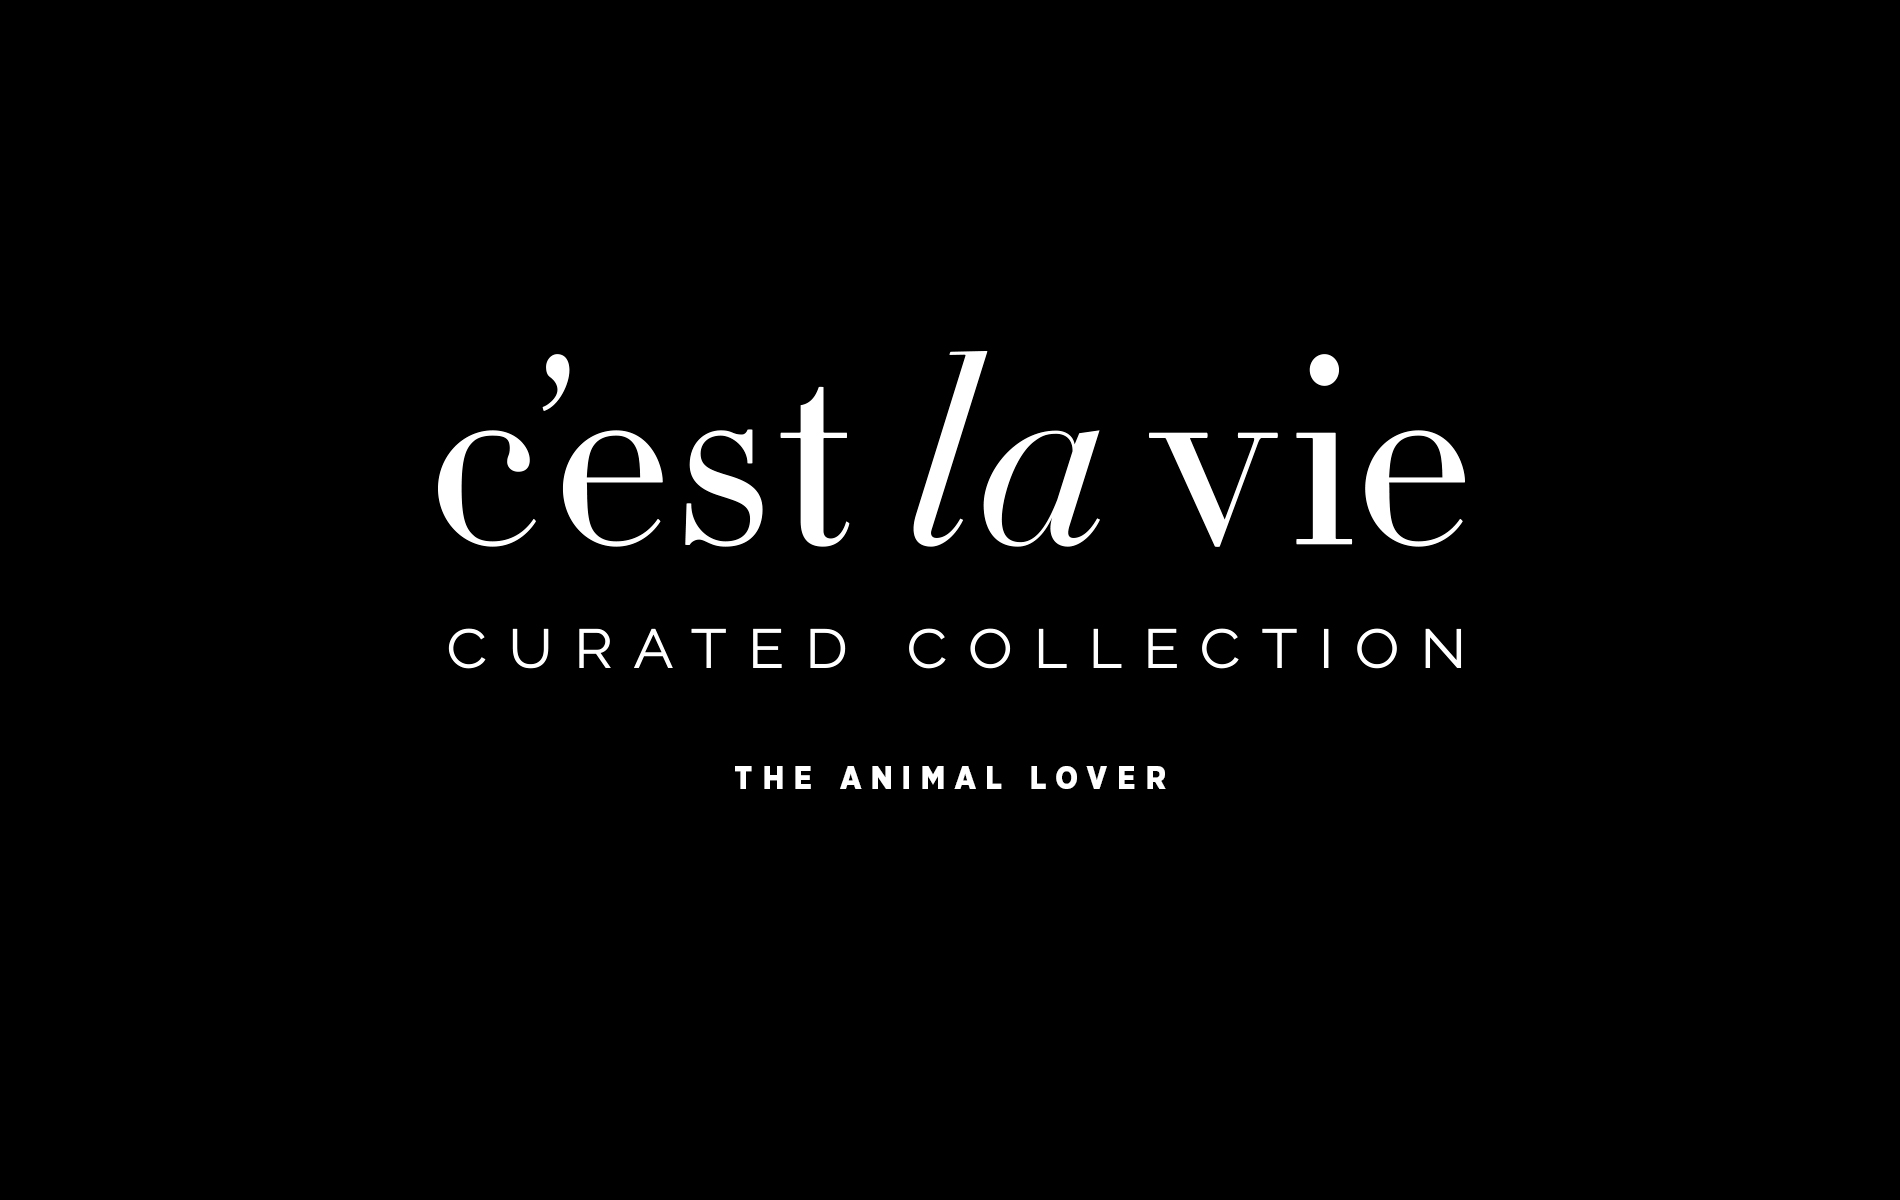 c'est la vie a curated collection august 2018 the animal lover